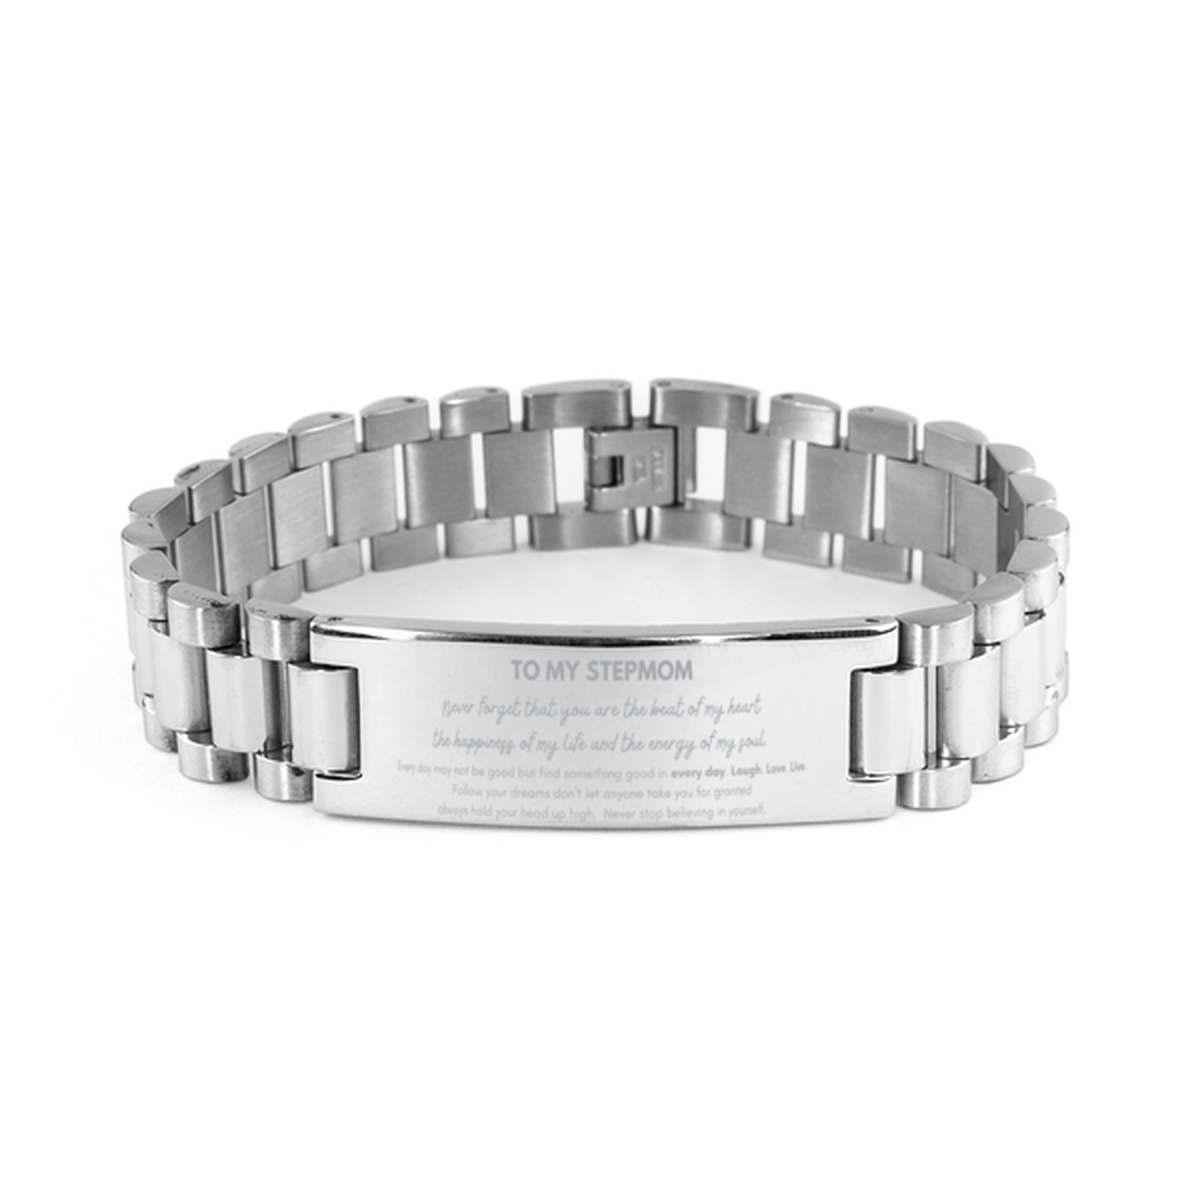 To My Stepmom Bracelet Gifts, Christmas Stepmom Ladder Stainless Steel Bracelet Present, Birthday Unique Motivational For Stepmom, To My Stepmom Never forget that you are the beat of my heart the happiness of my life and the energy of my soul